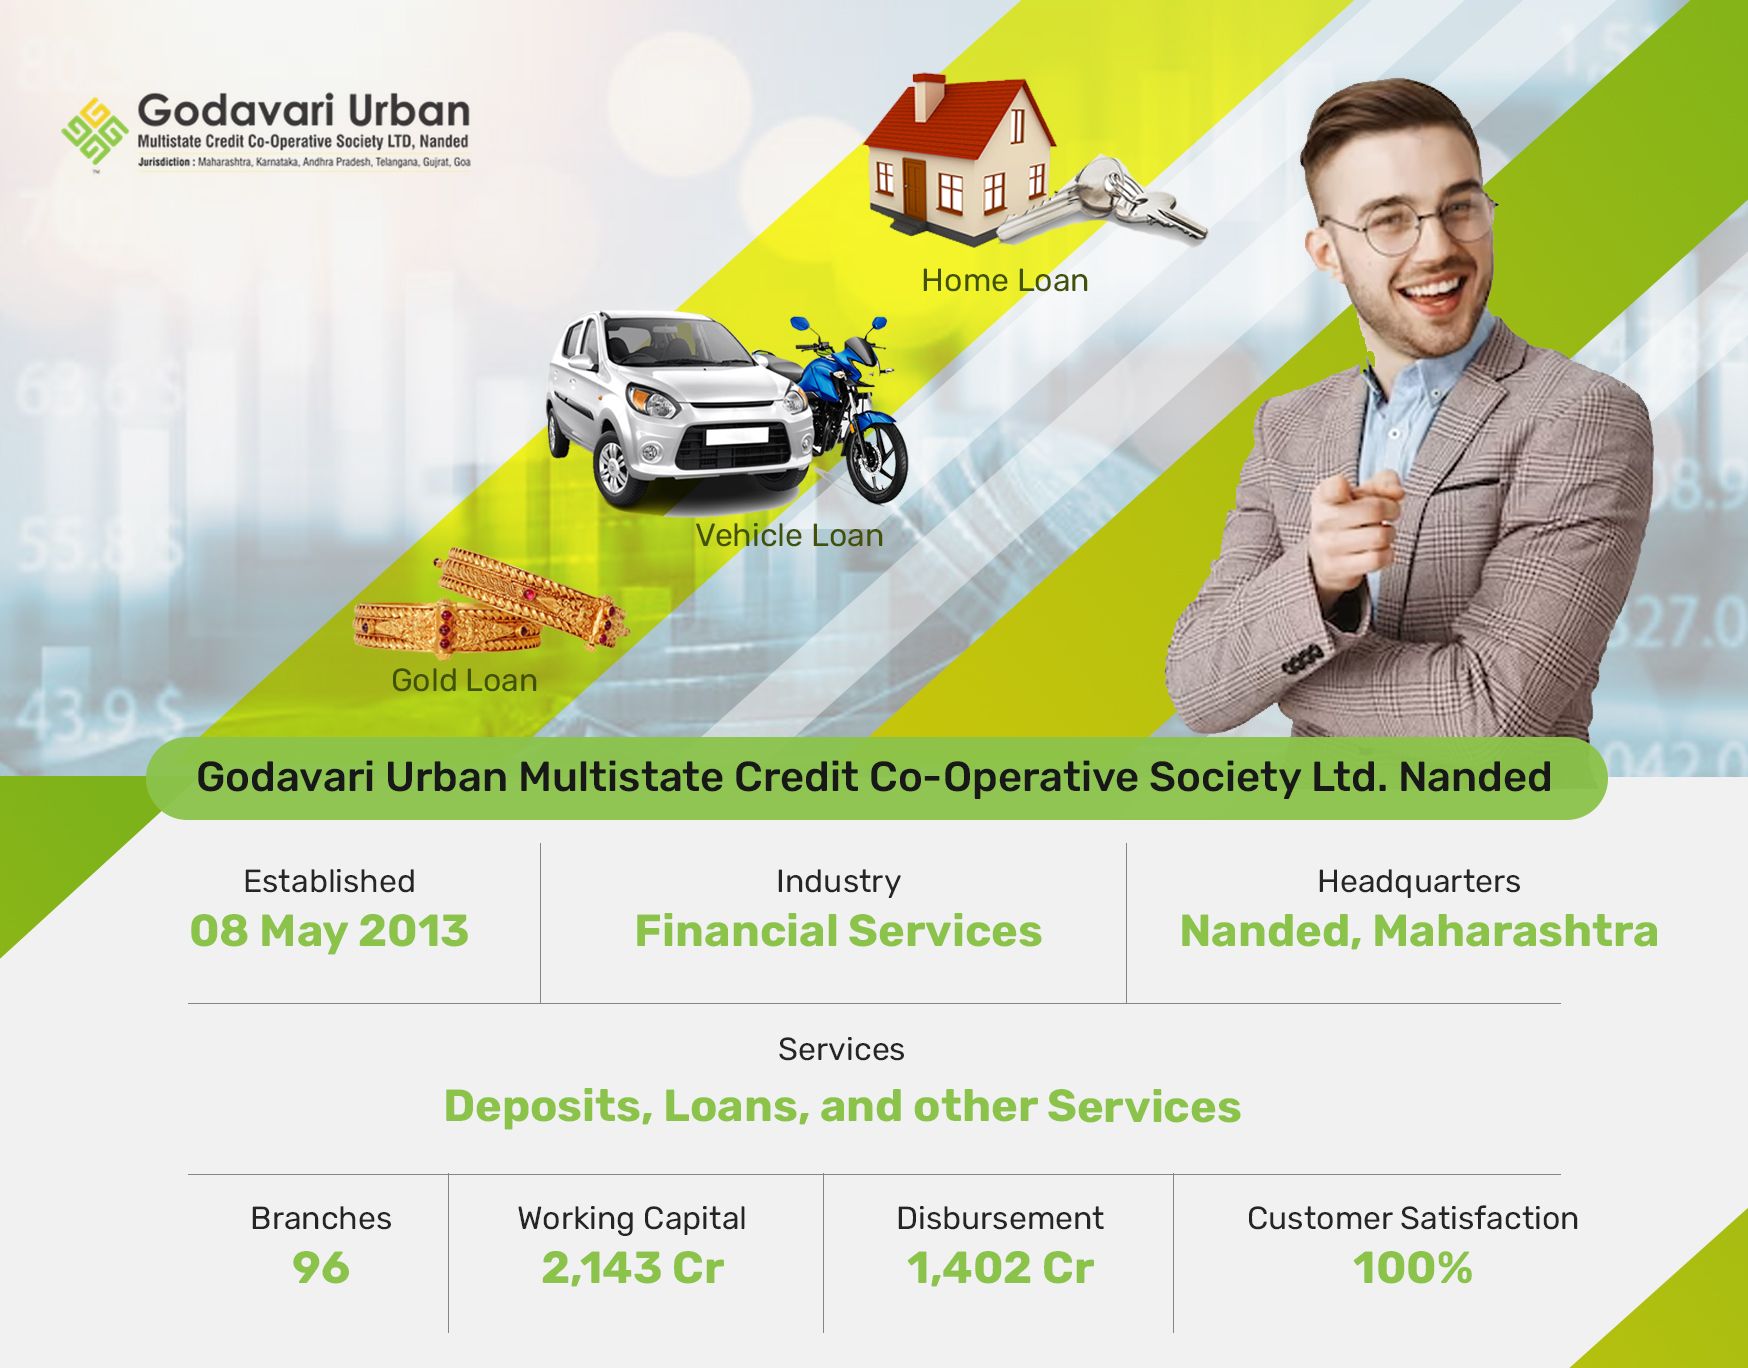 Godavari Urban maintains a 100% collection call rate with Corefactors as their debt collection and recovery CRM.